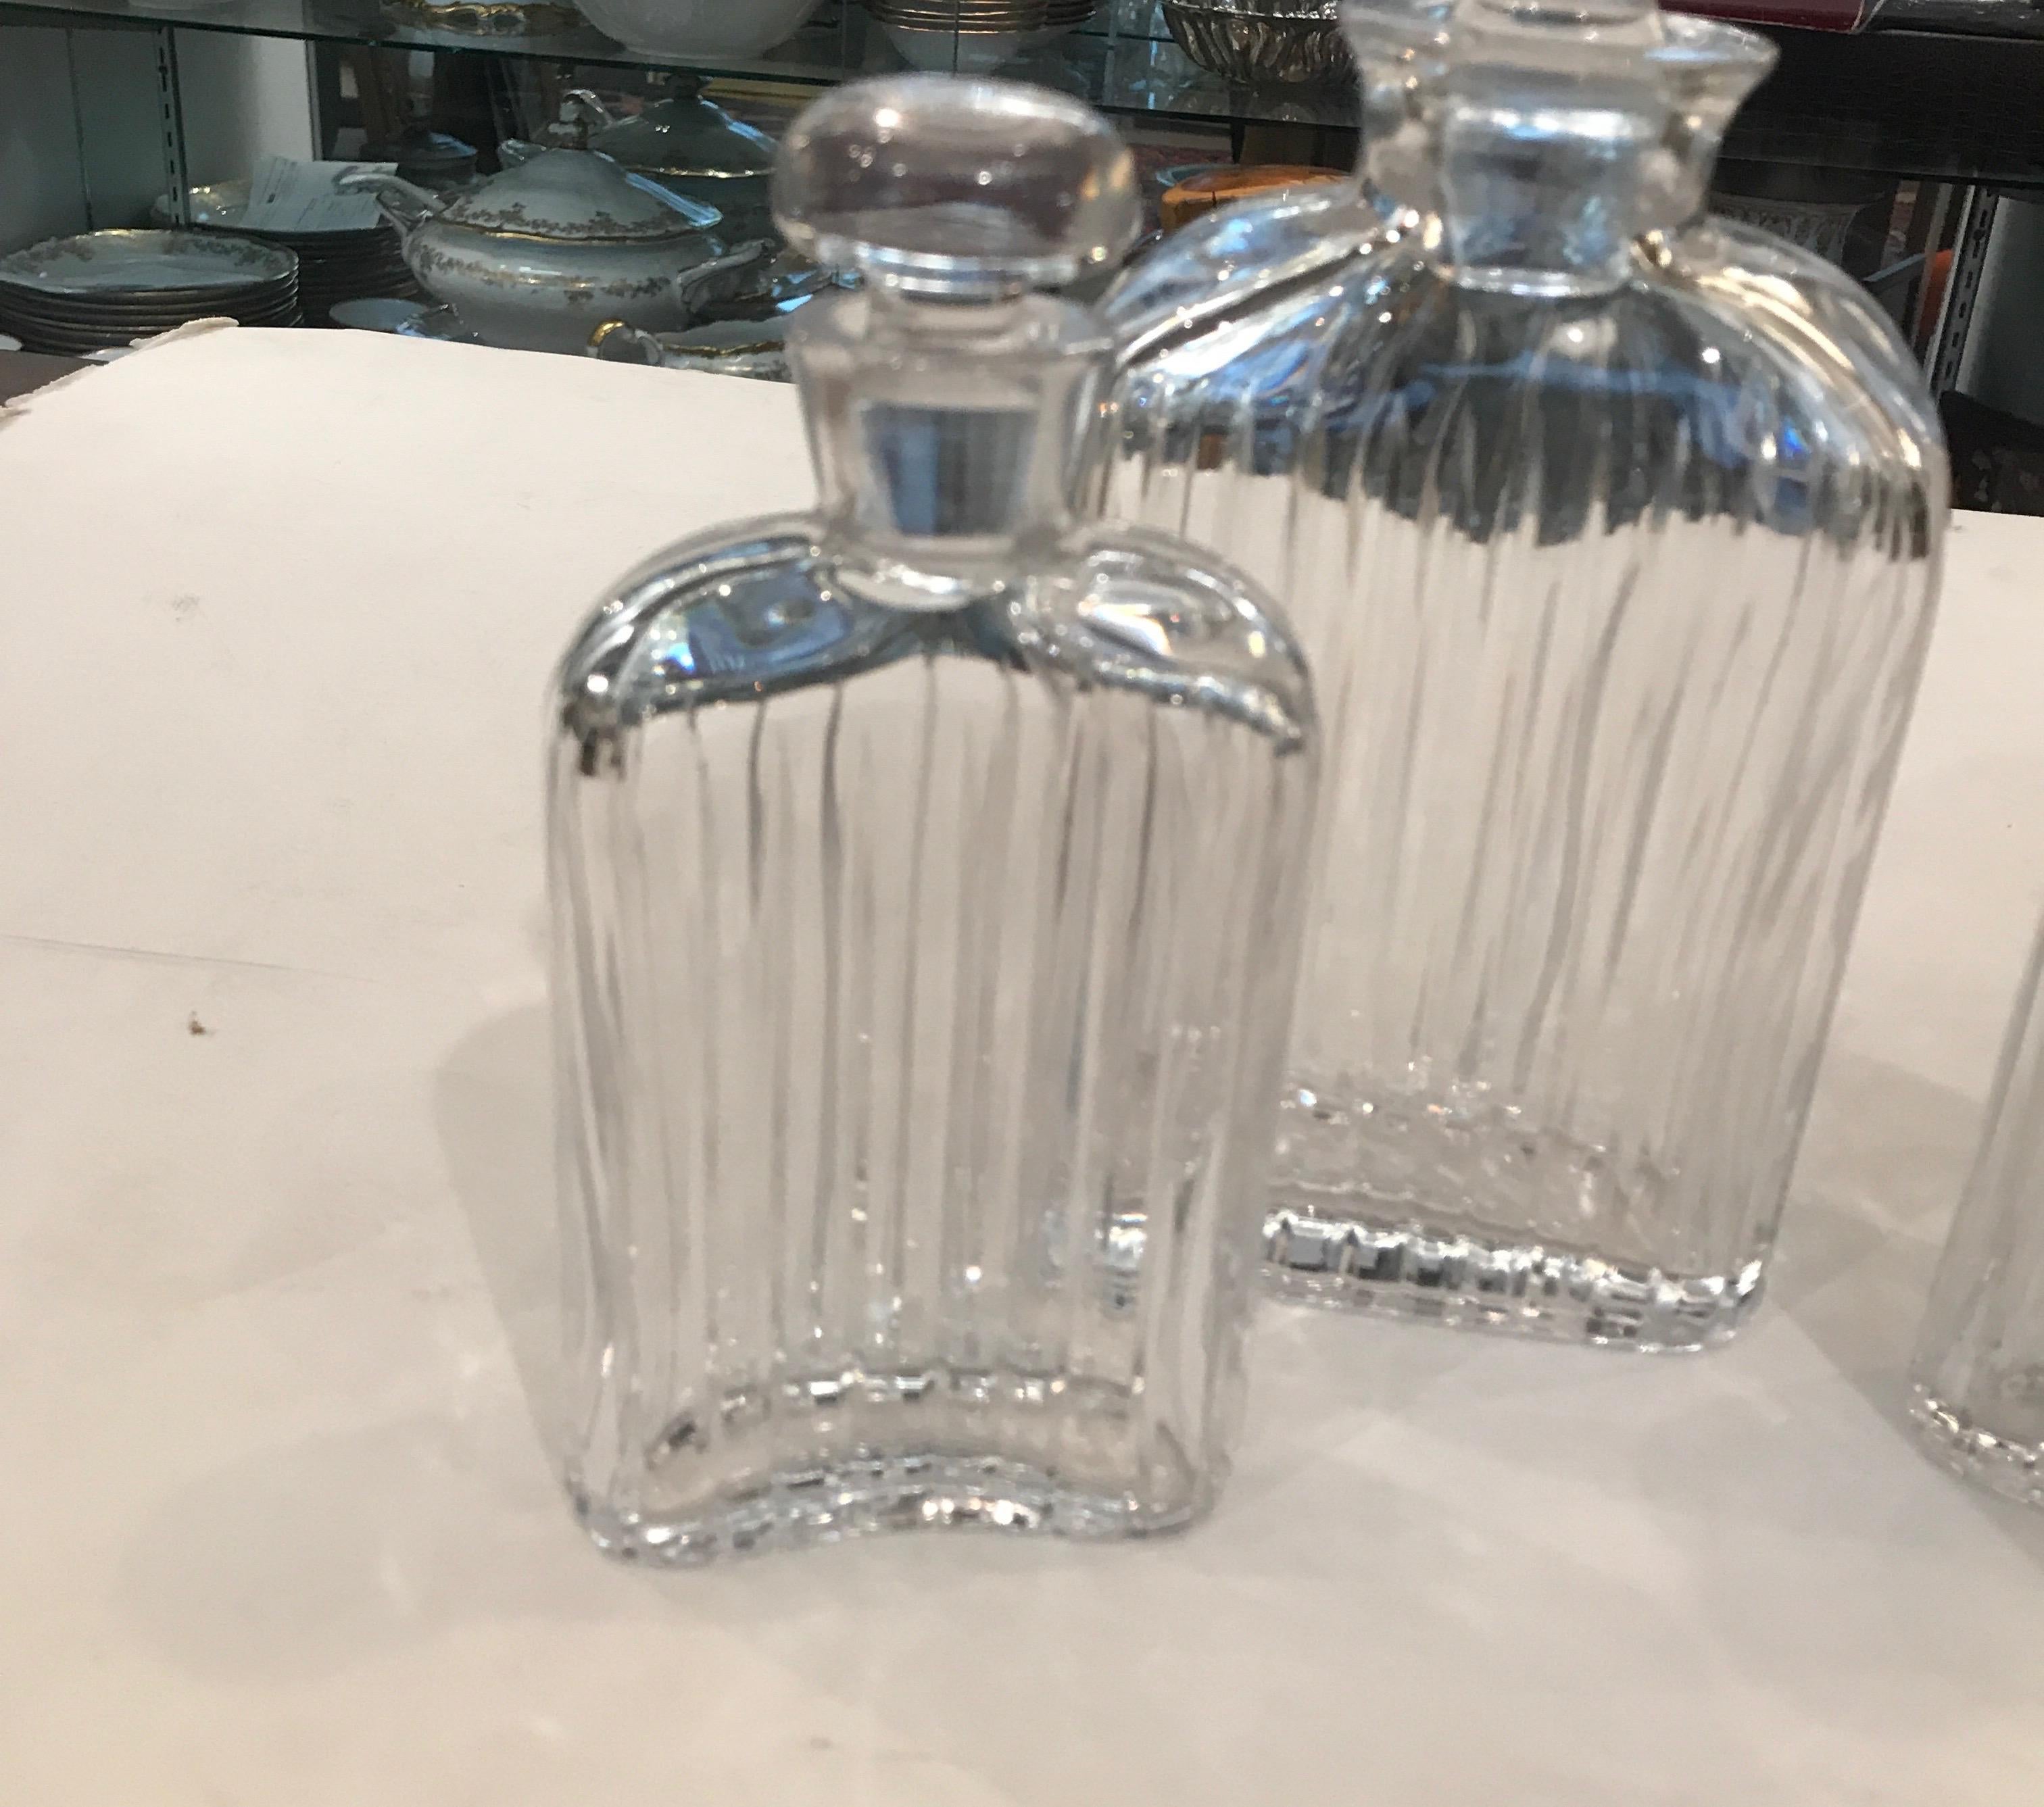 Late 20th Century Art Deco Bar Ware Crystal Decanter Set of 4